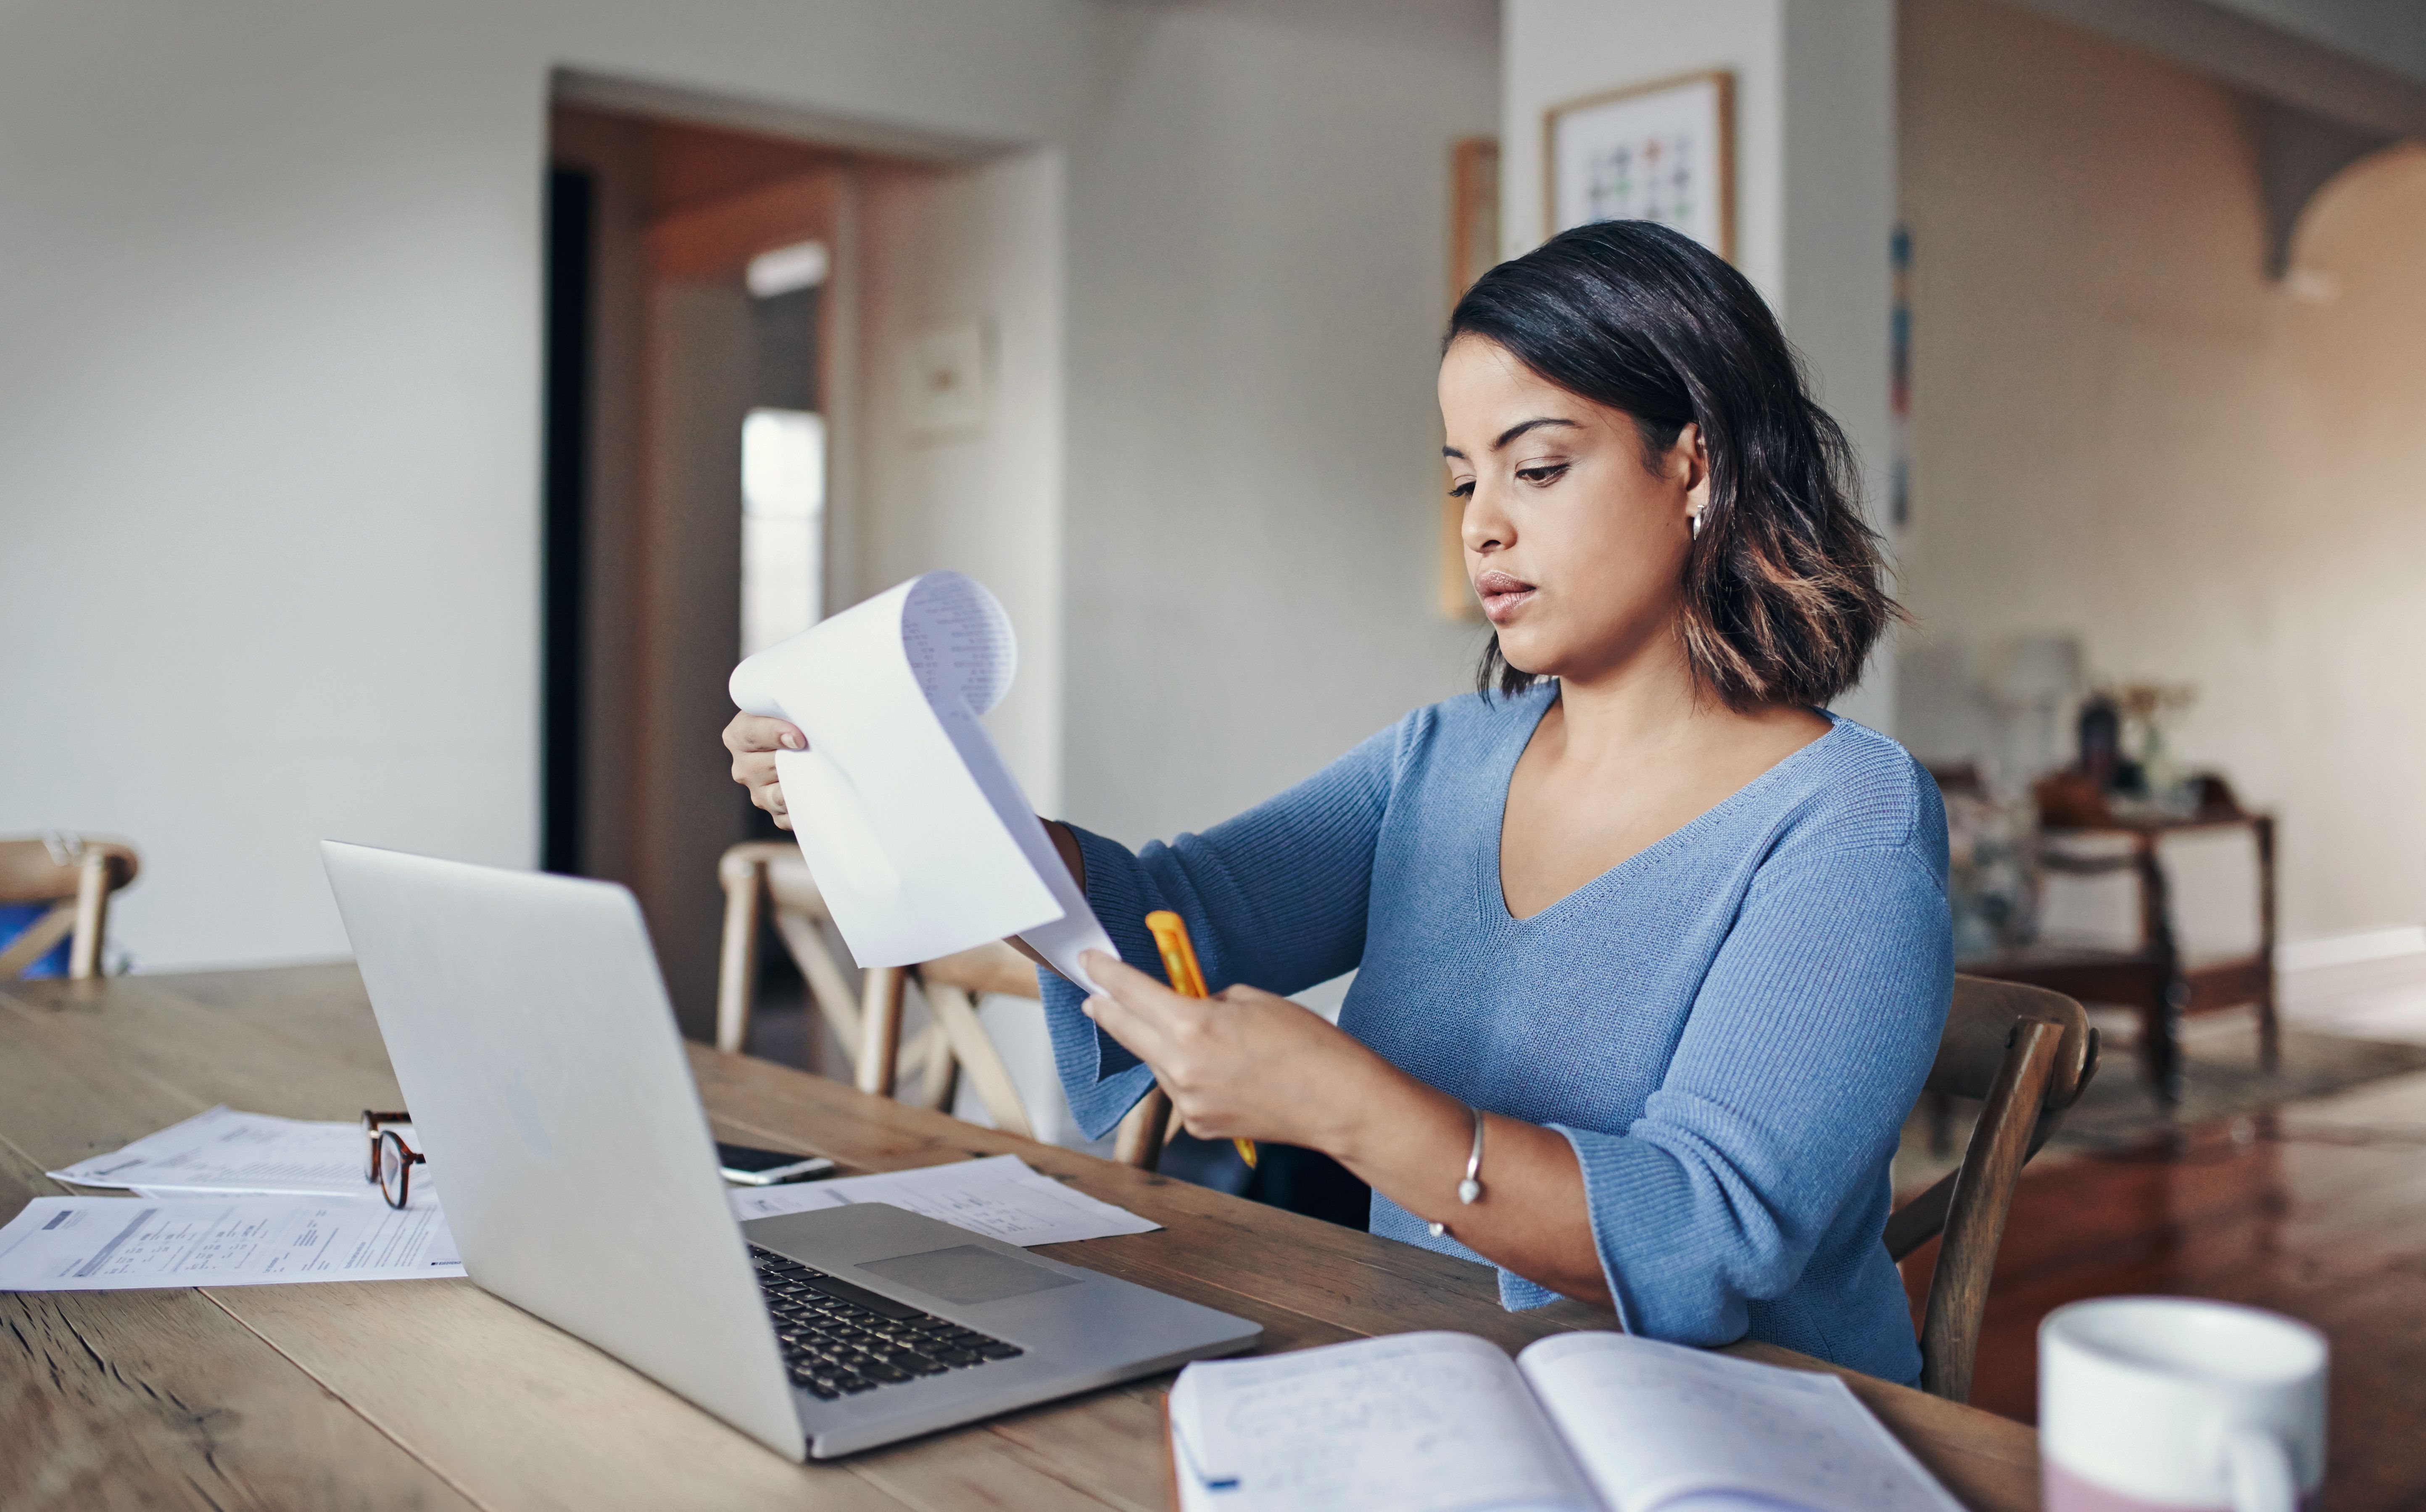 A person holds a pen while looking through a paper documents in front of a laptop at home.